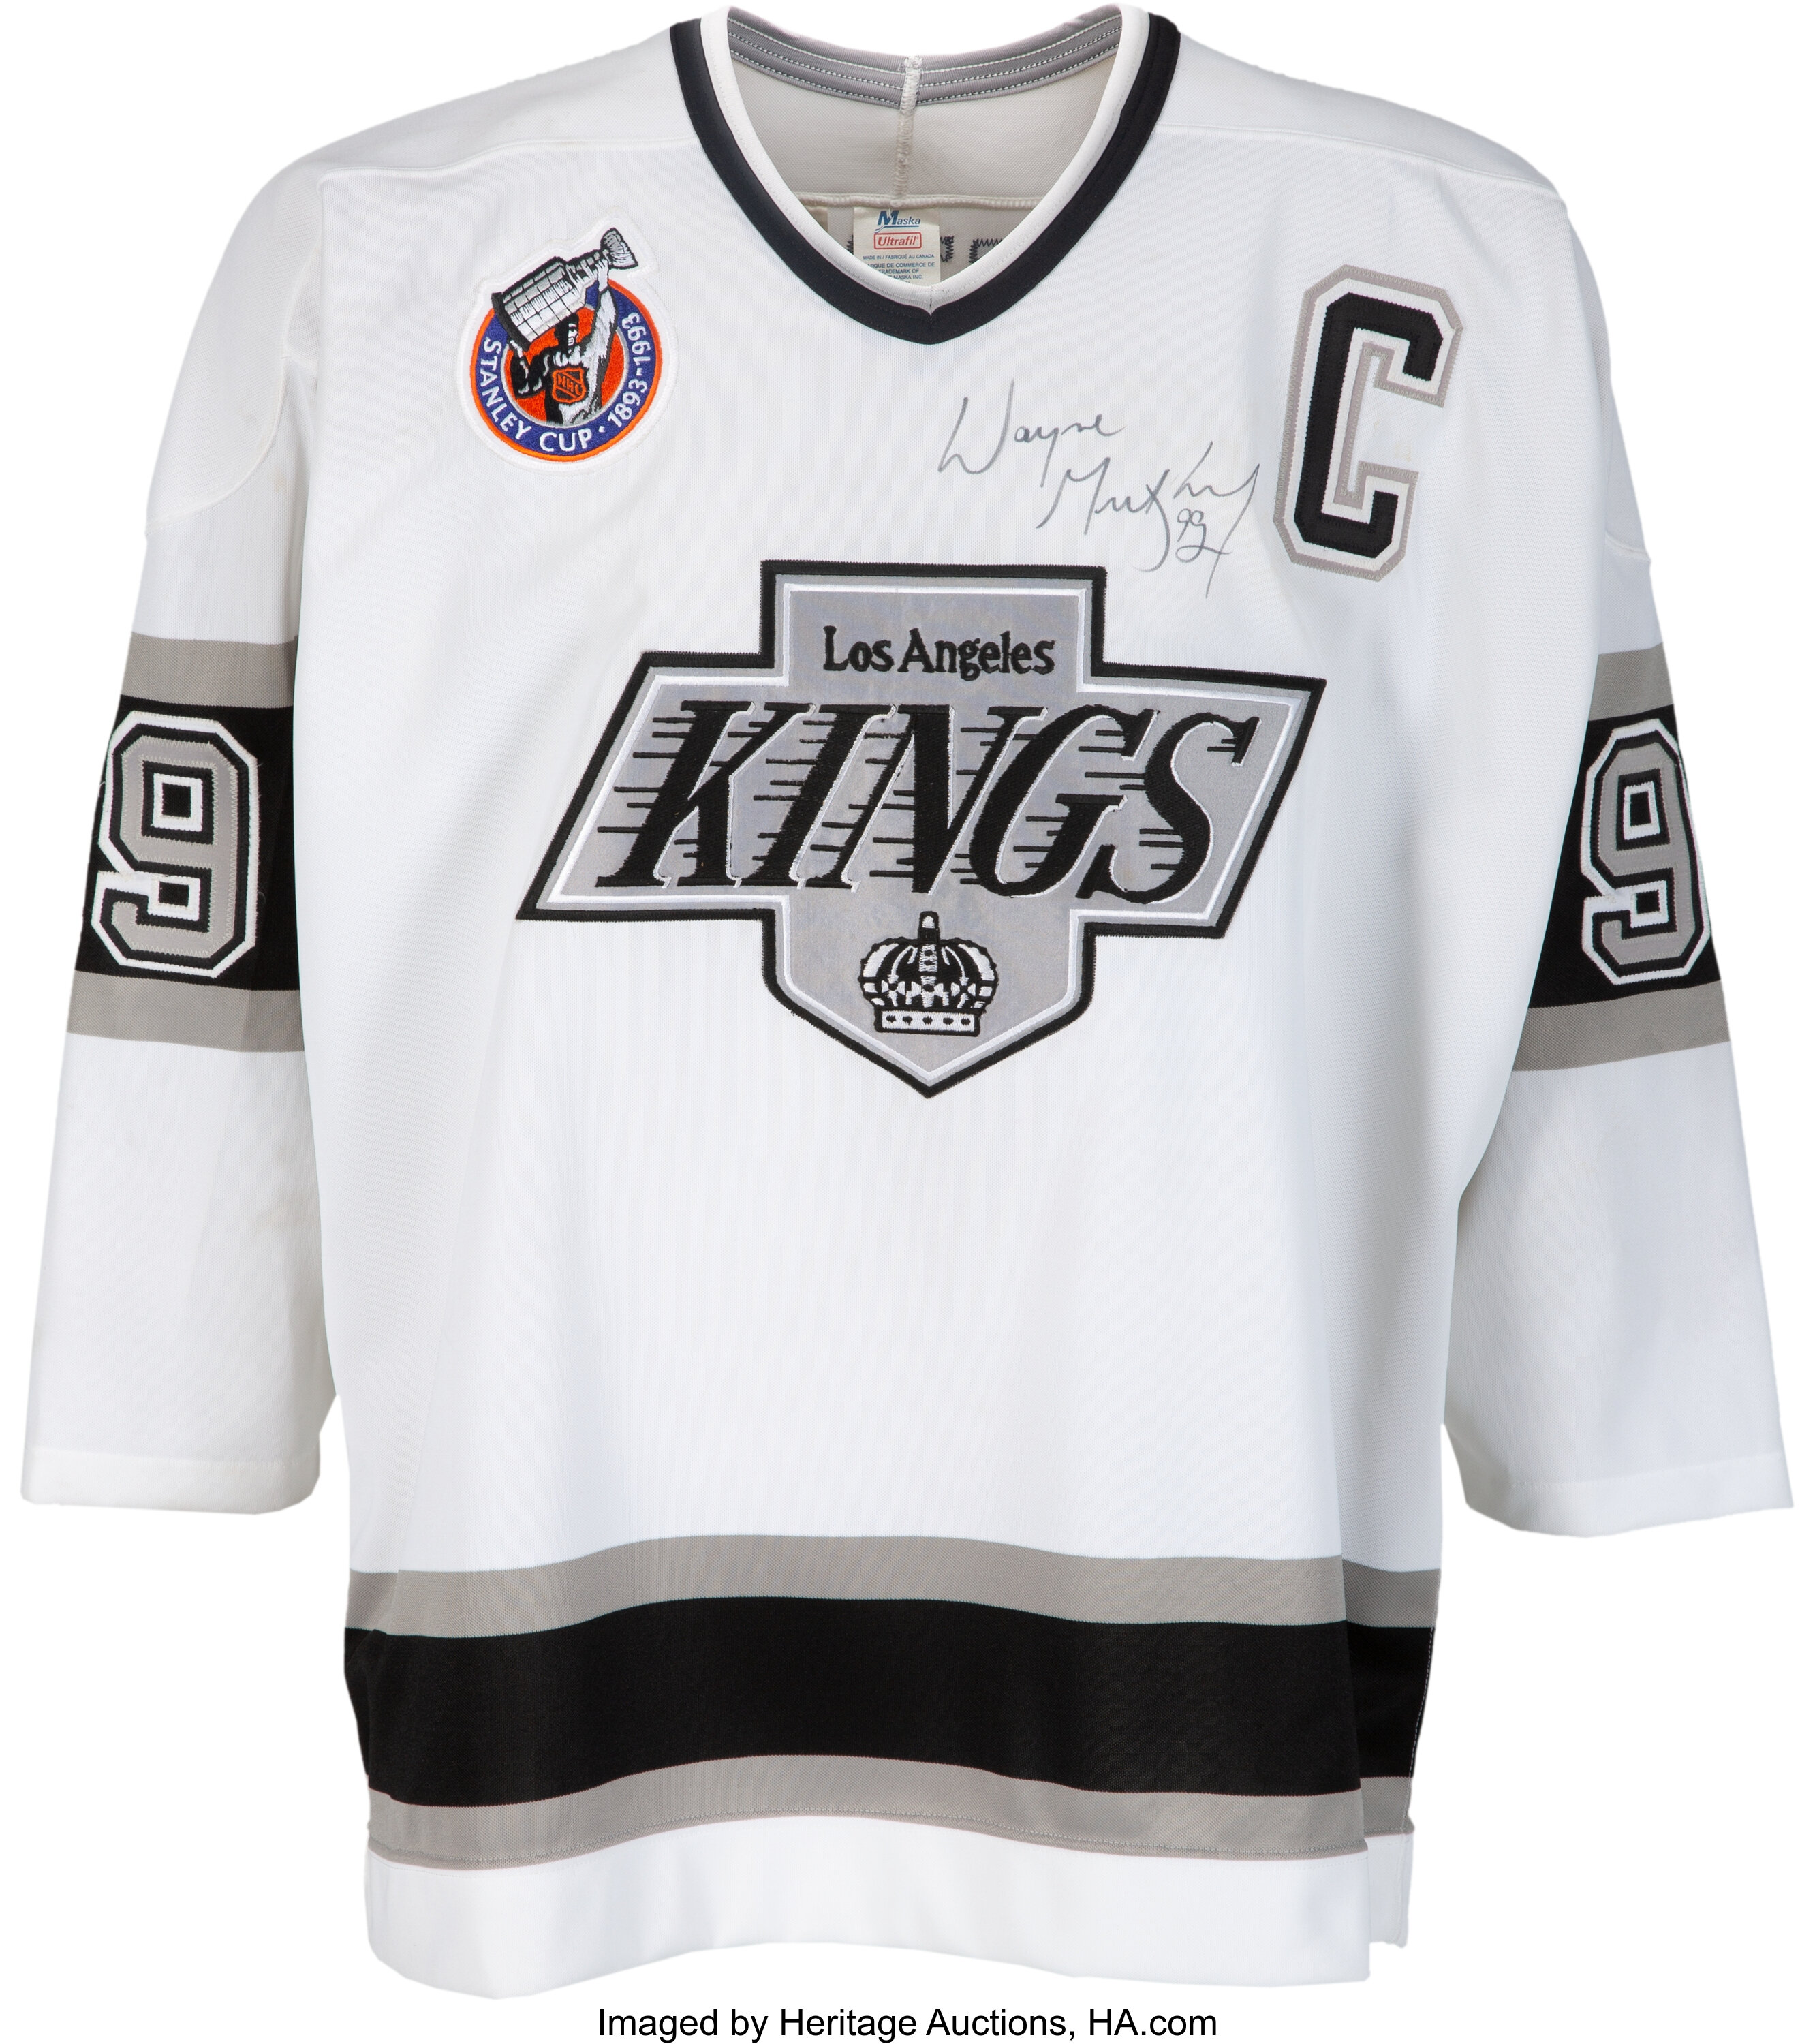 Wayne Gretzky Autographed Vintage Throwback Black Mitchell & Ness 1992-93  Los Angeles Kings Jersey